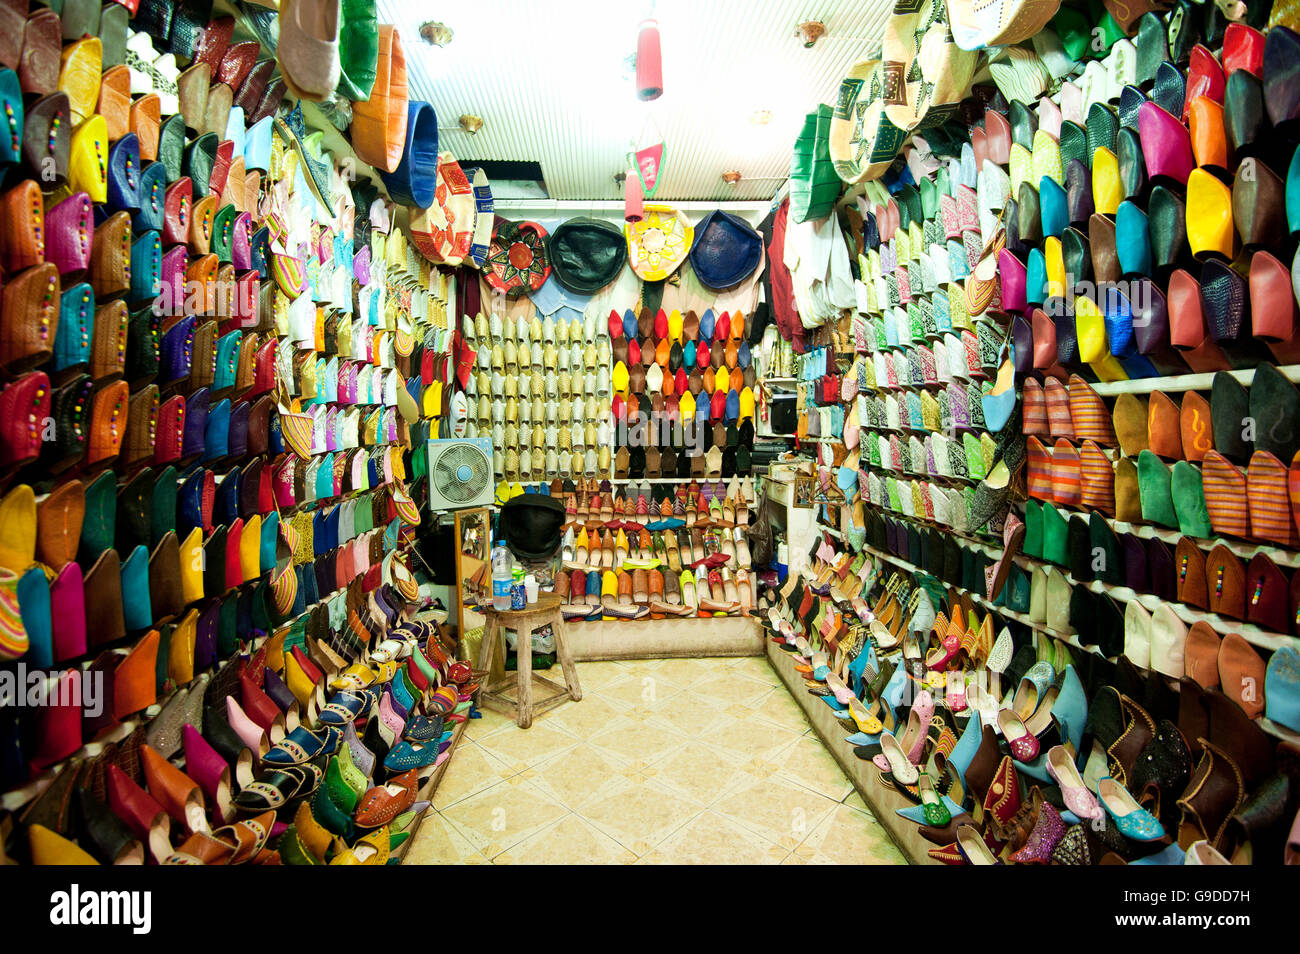 Slipper shop in the souks or markets, Marrakech, Morocco, North Africa, Africa Stock Photo